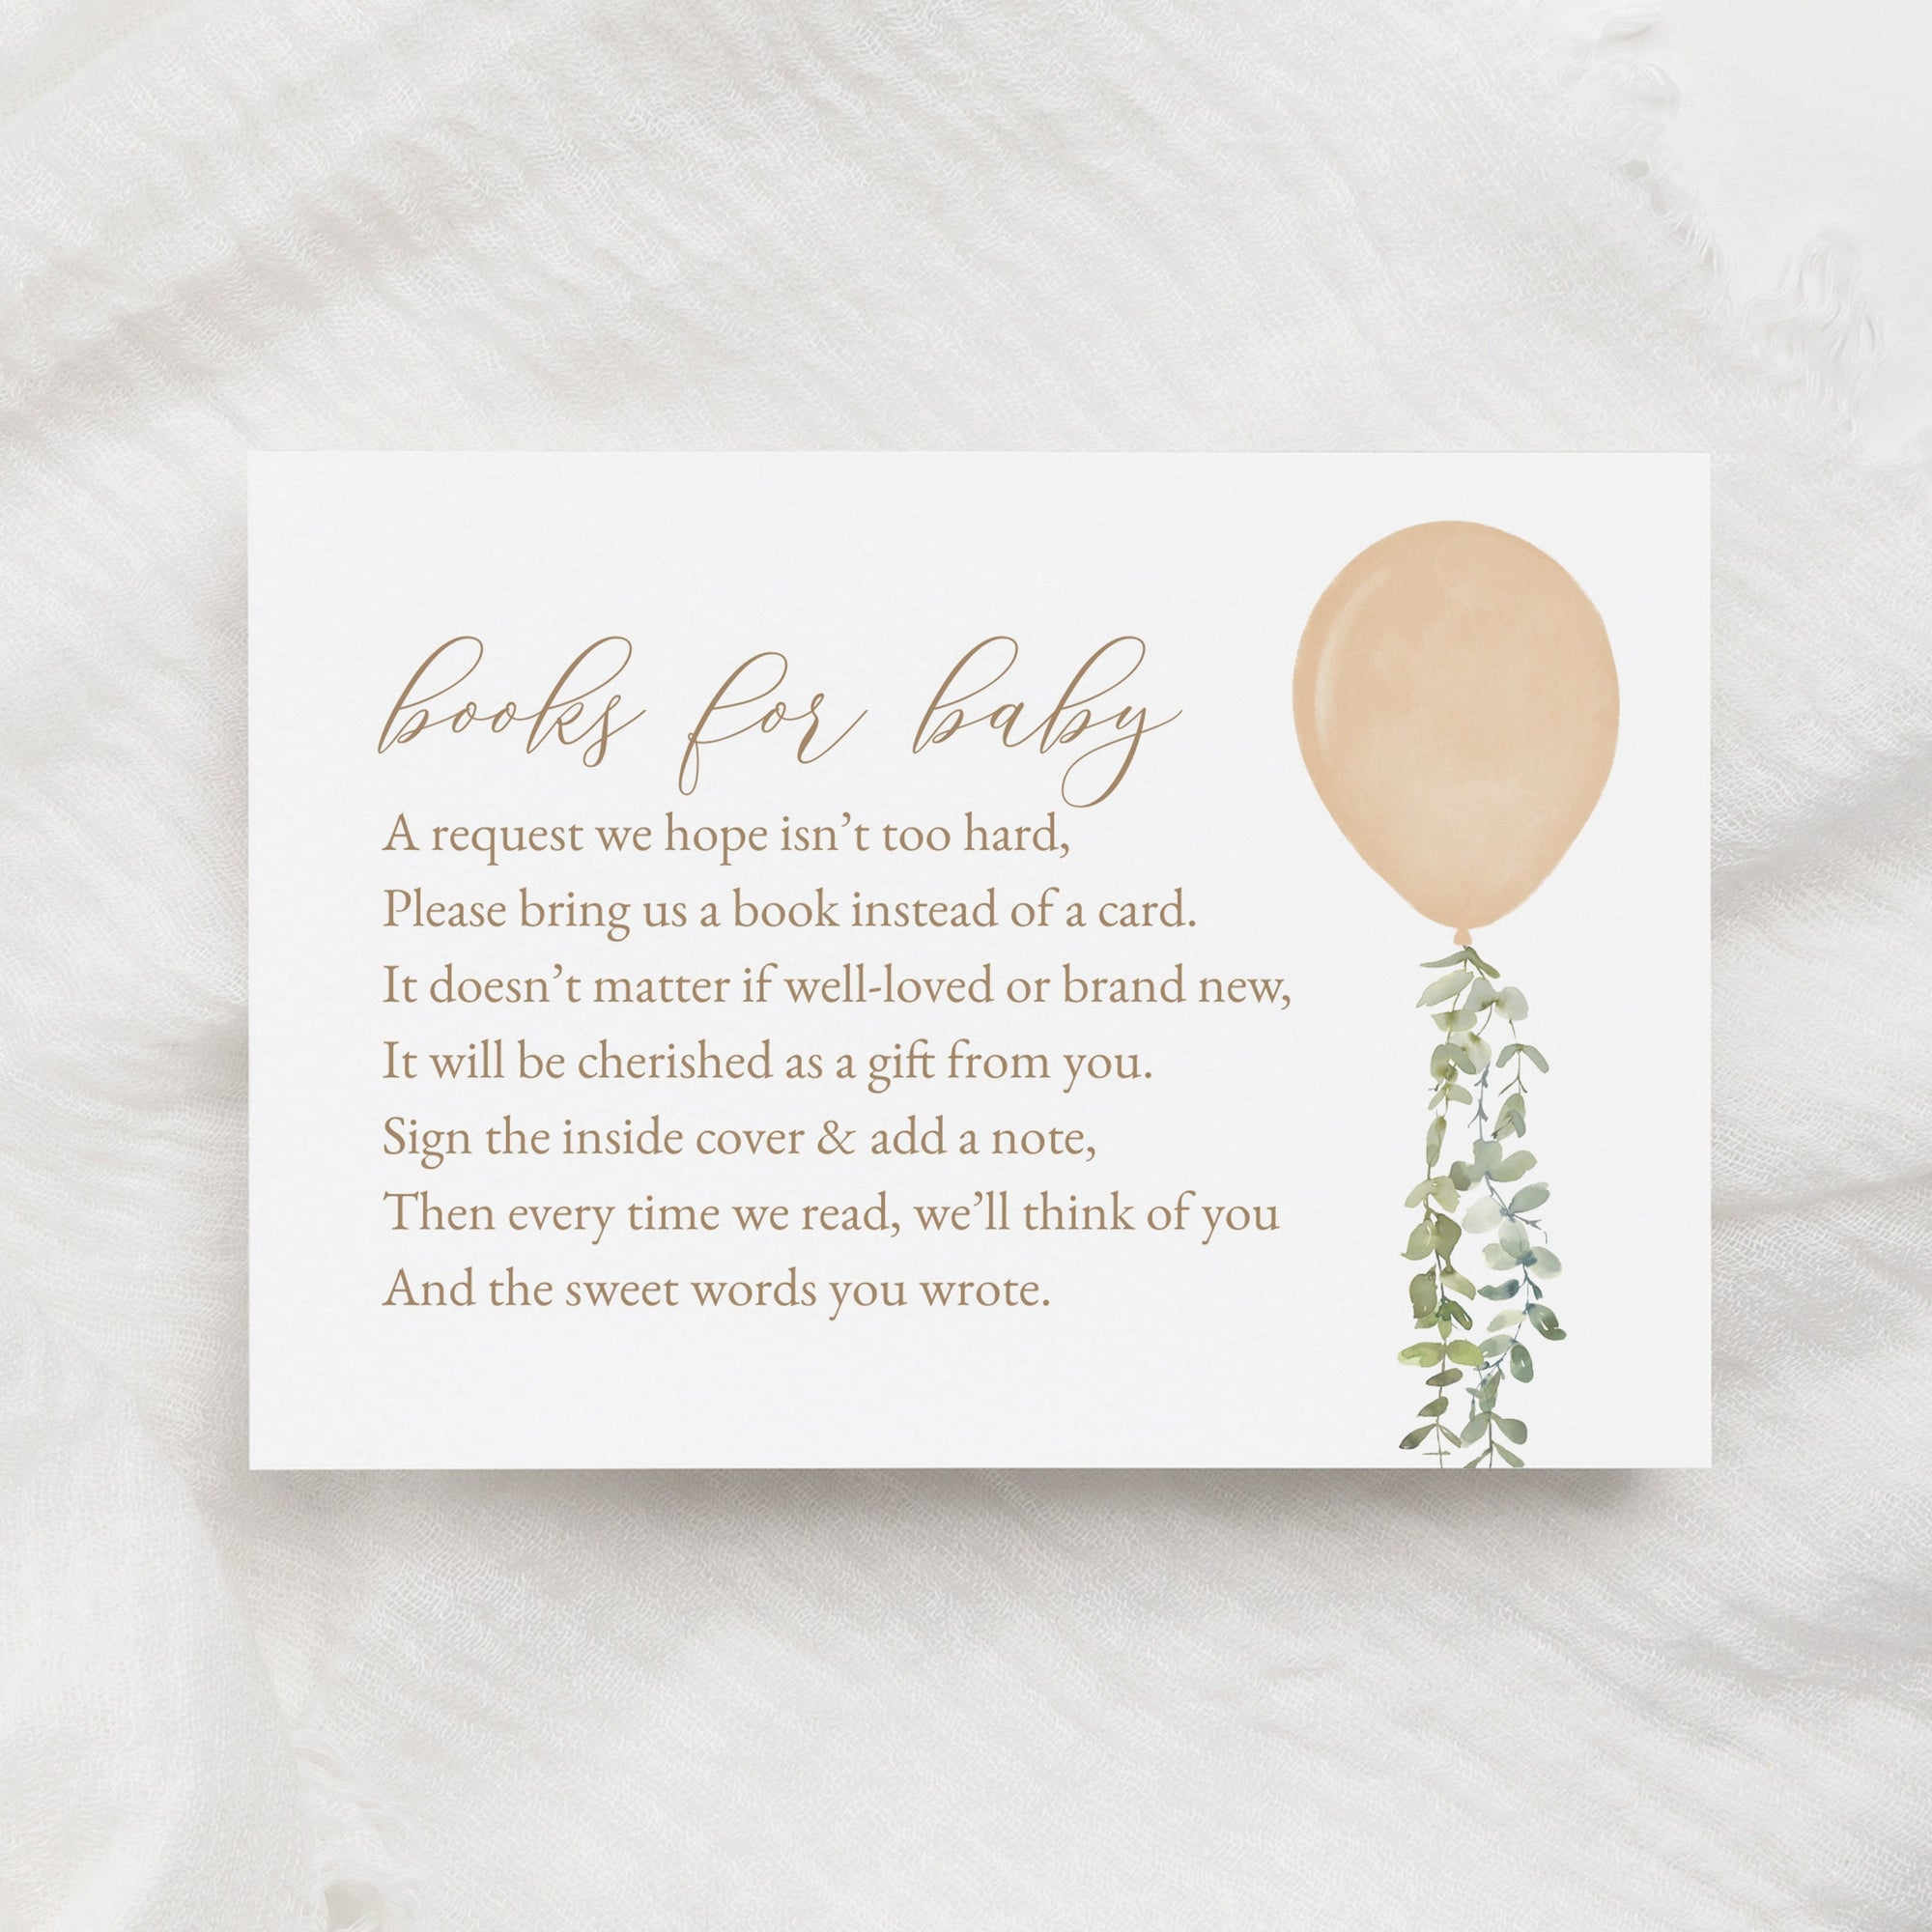 Gold Balloon Books for Baby Card Template, Watercolor Balloon Baby Shower Book Request Insert, Printable Template, DIGITAL DOWNLOAD